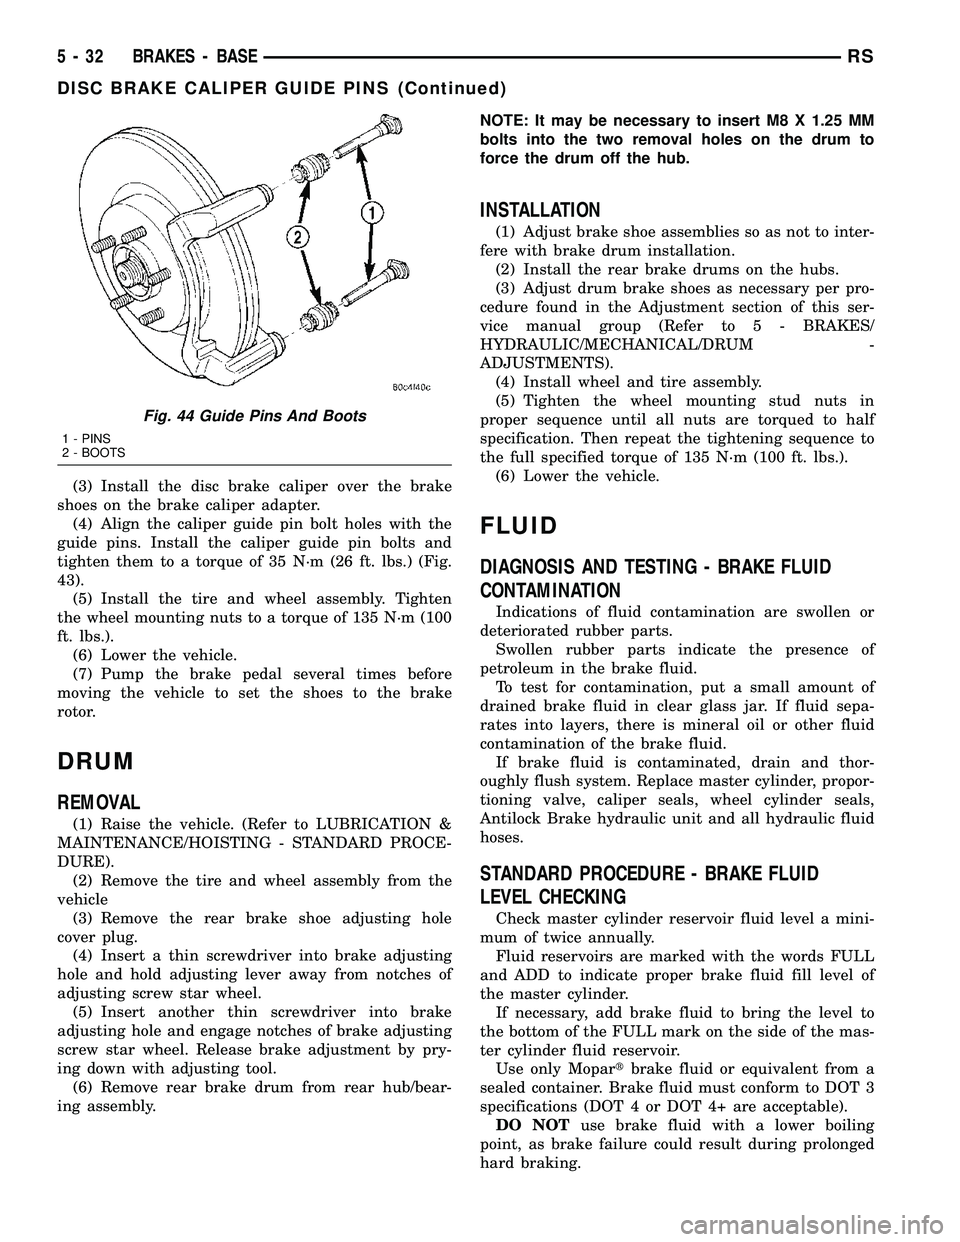 DODGE TOWN AND COUNTRY 2004  Service Manual (3) Install the disc brake caliper over the brake
shoes on the brake caliper adapter.
(4) Align the caliper guide pin bolt holes with the
guide pins. Install the caliper guide pin bolts and
tighten th